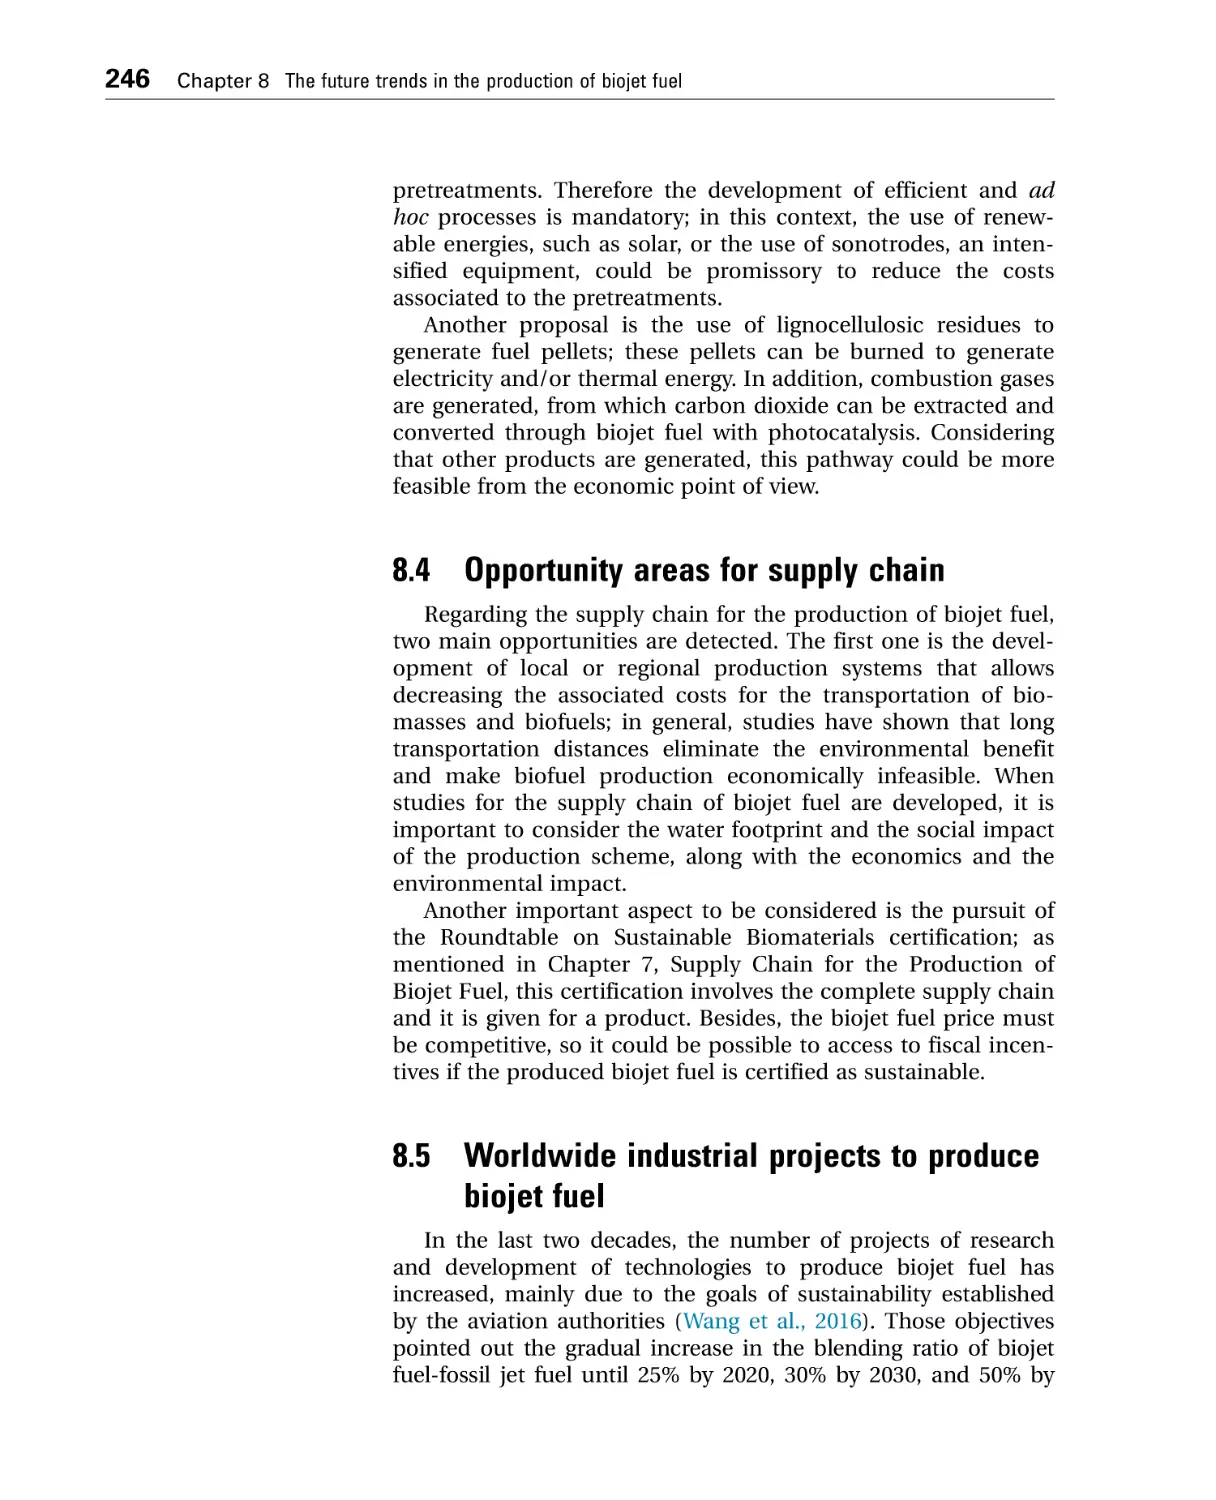 8.4 Opportunity areas for supply chain
8.5 Worldwide industrial projects to produce biojet fuel